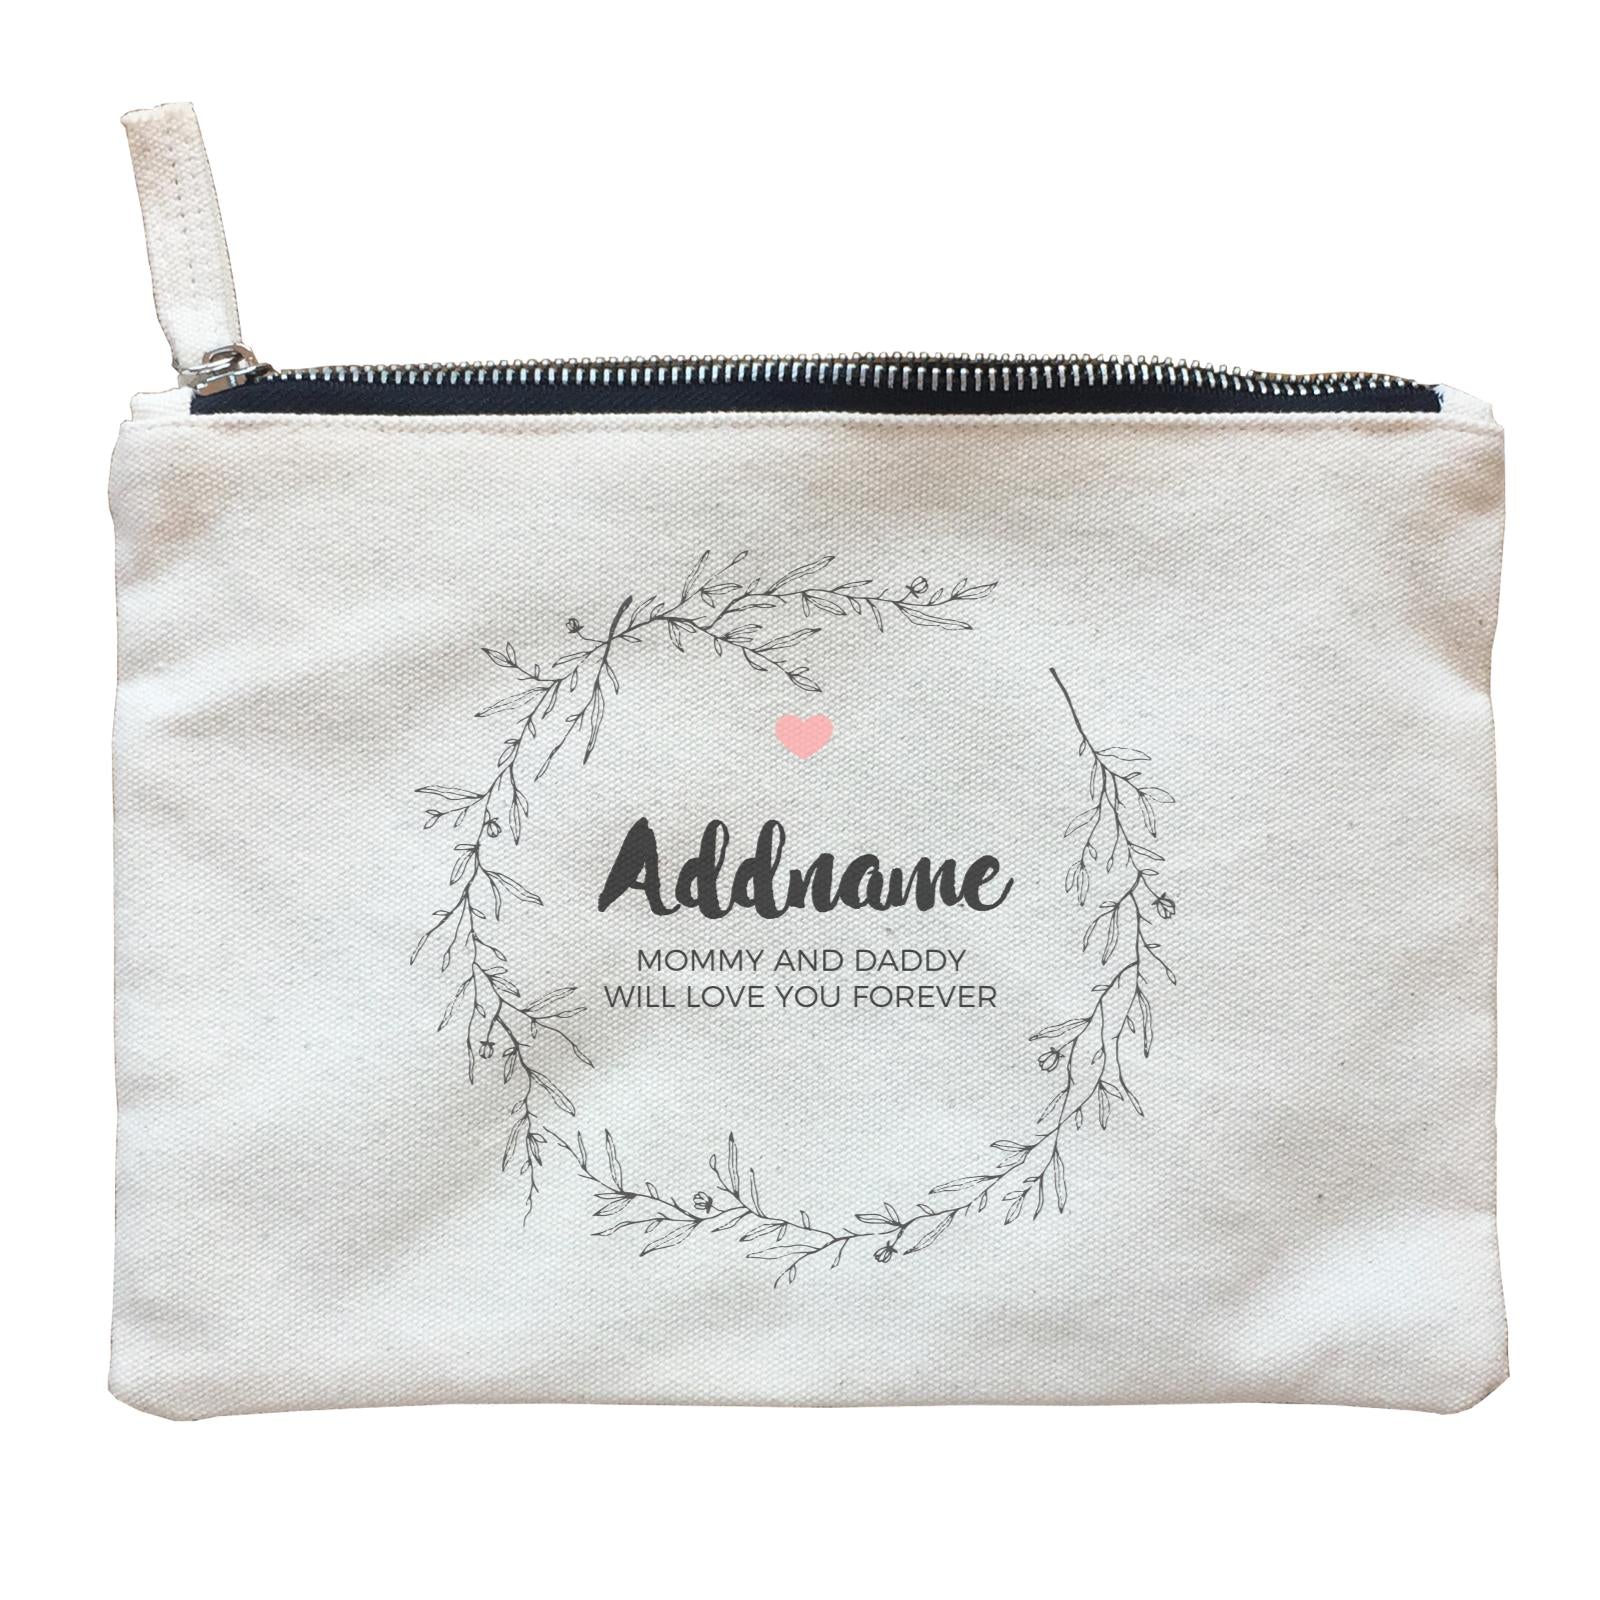 Doodle Wreath Personalizable with Name and Text Zipper Pouch